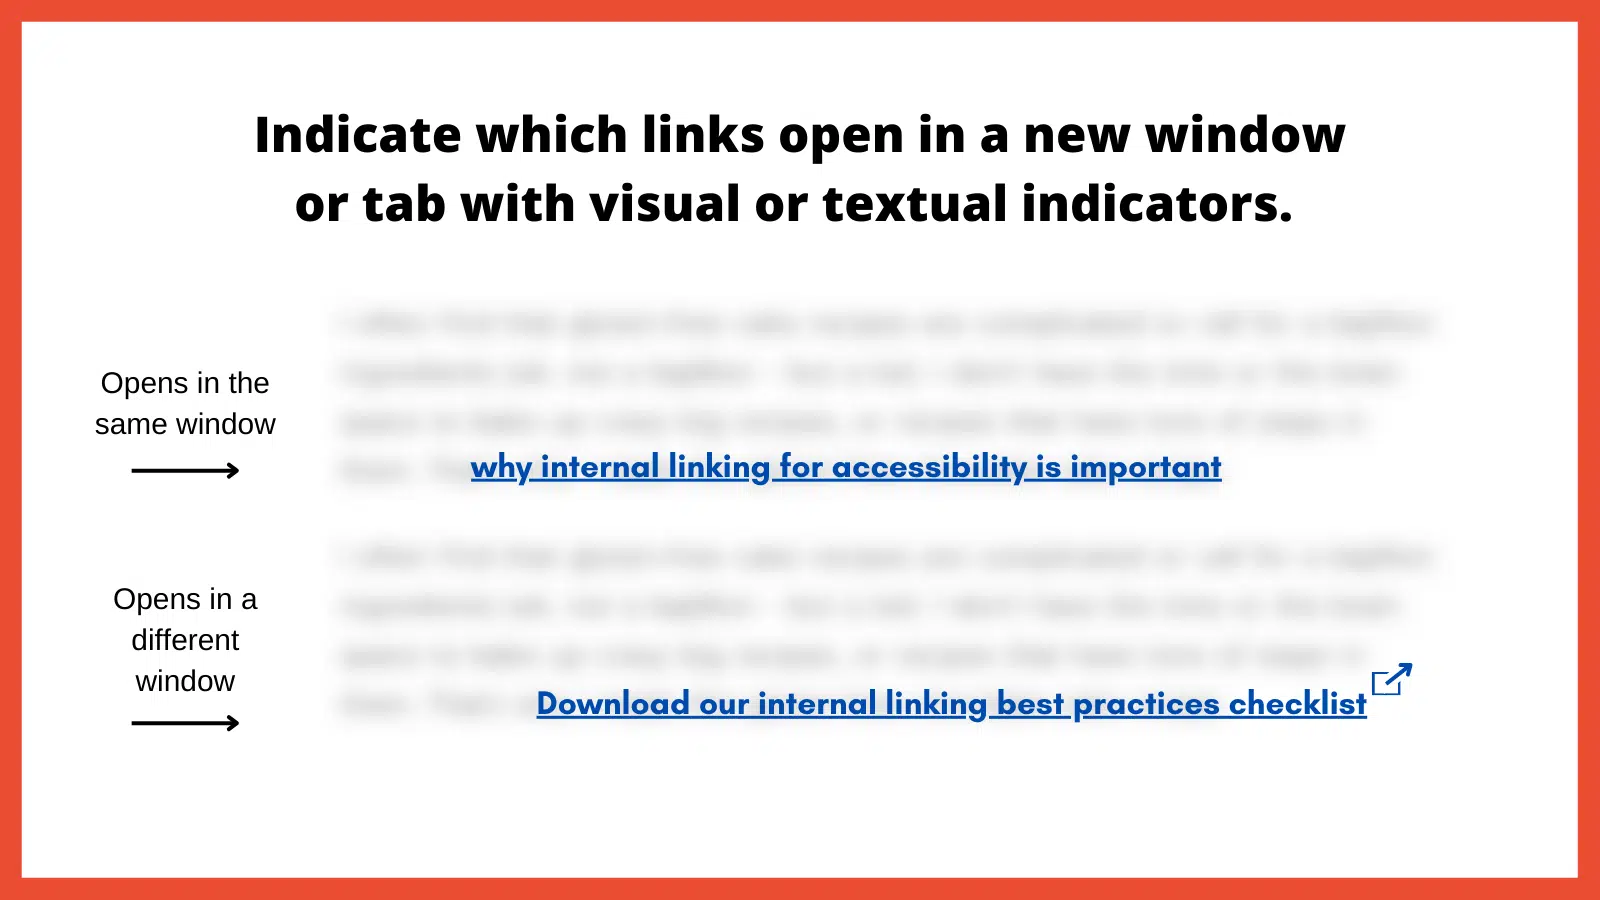 Graphic. Title reads, “Indicate which links open in a new window or tab with visual or textual indicators.” Below are two blurred blocks of text, each with a legible, underlined link. One is labeled “Opens in the same window.” The other, labeled “Opens in a different window”, has an icon of a square with an arrow pointing out of the upper right corner at the end of the link.